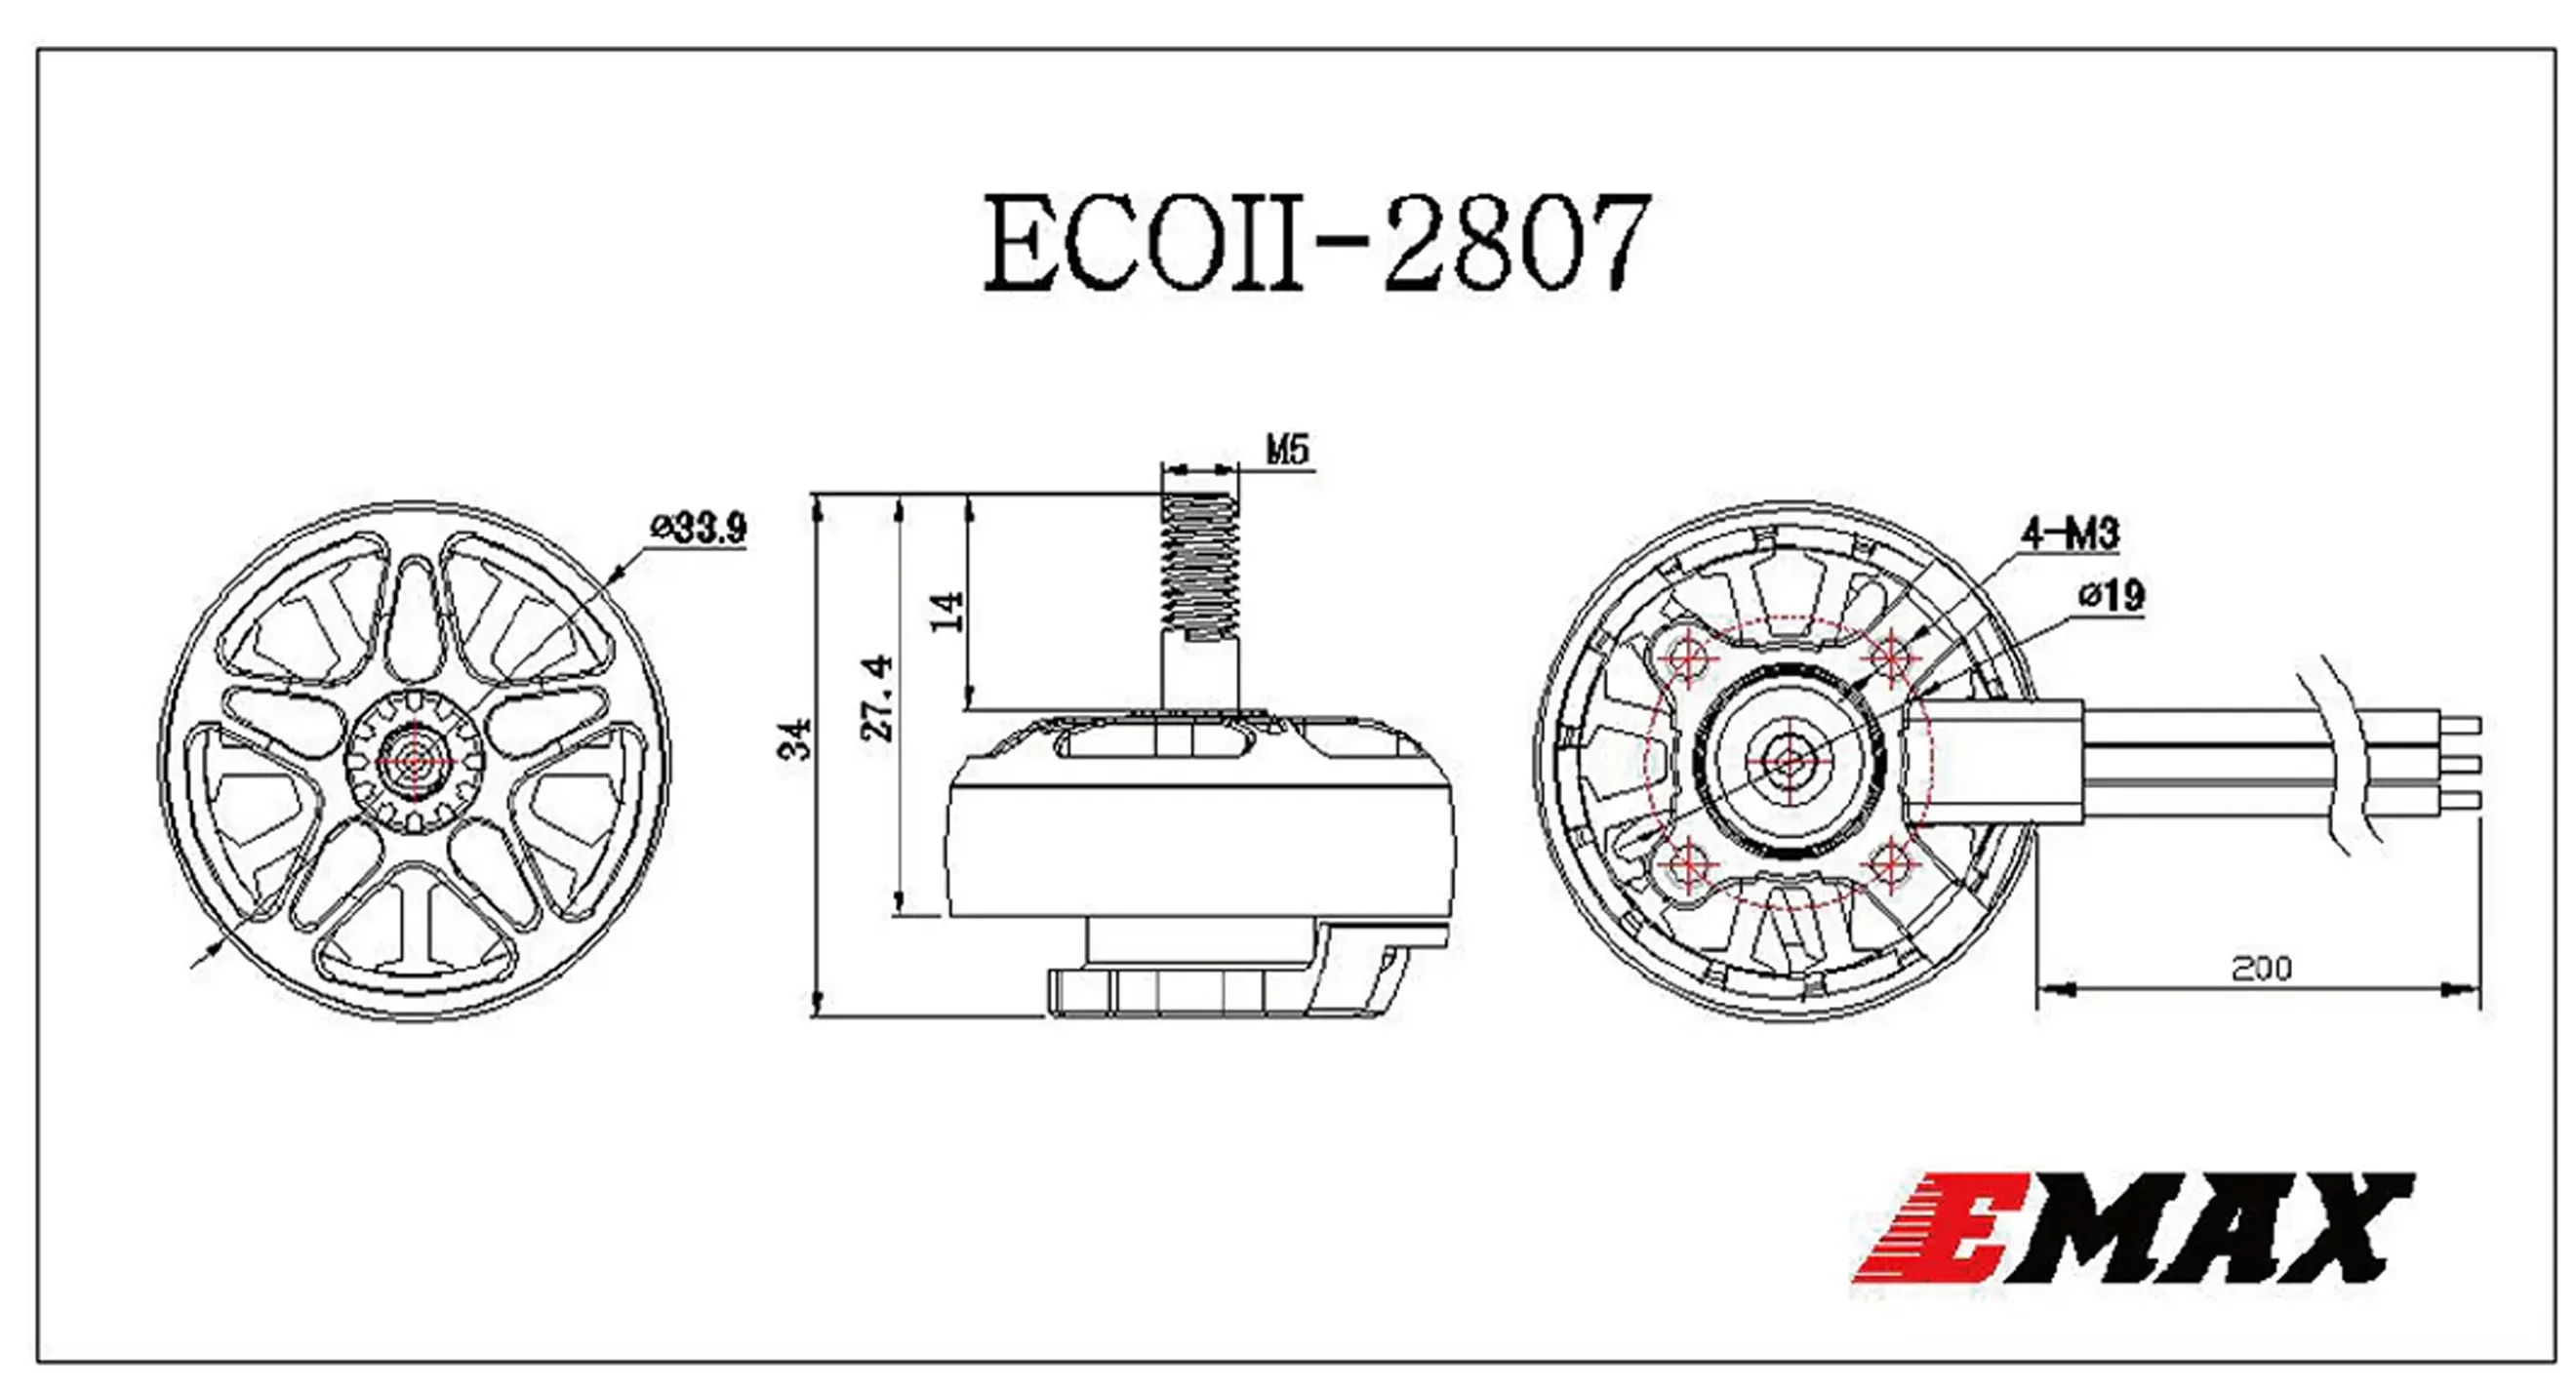 Emax ECO II 2807 brushless motor dimensions